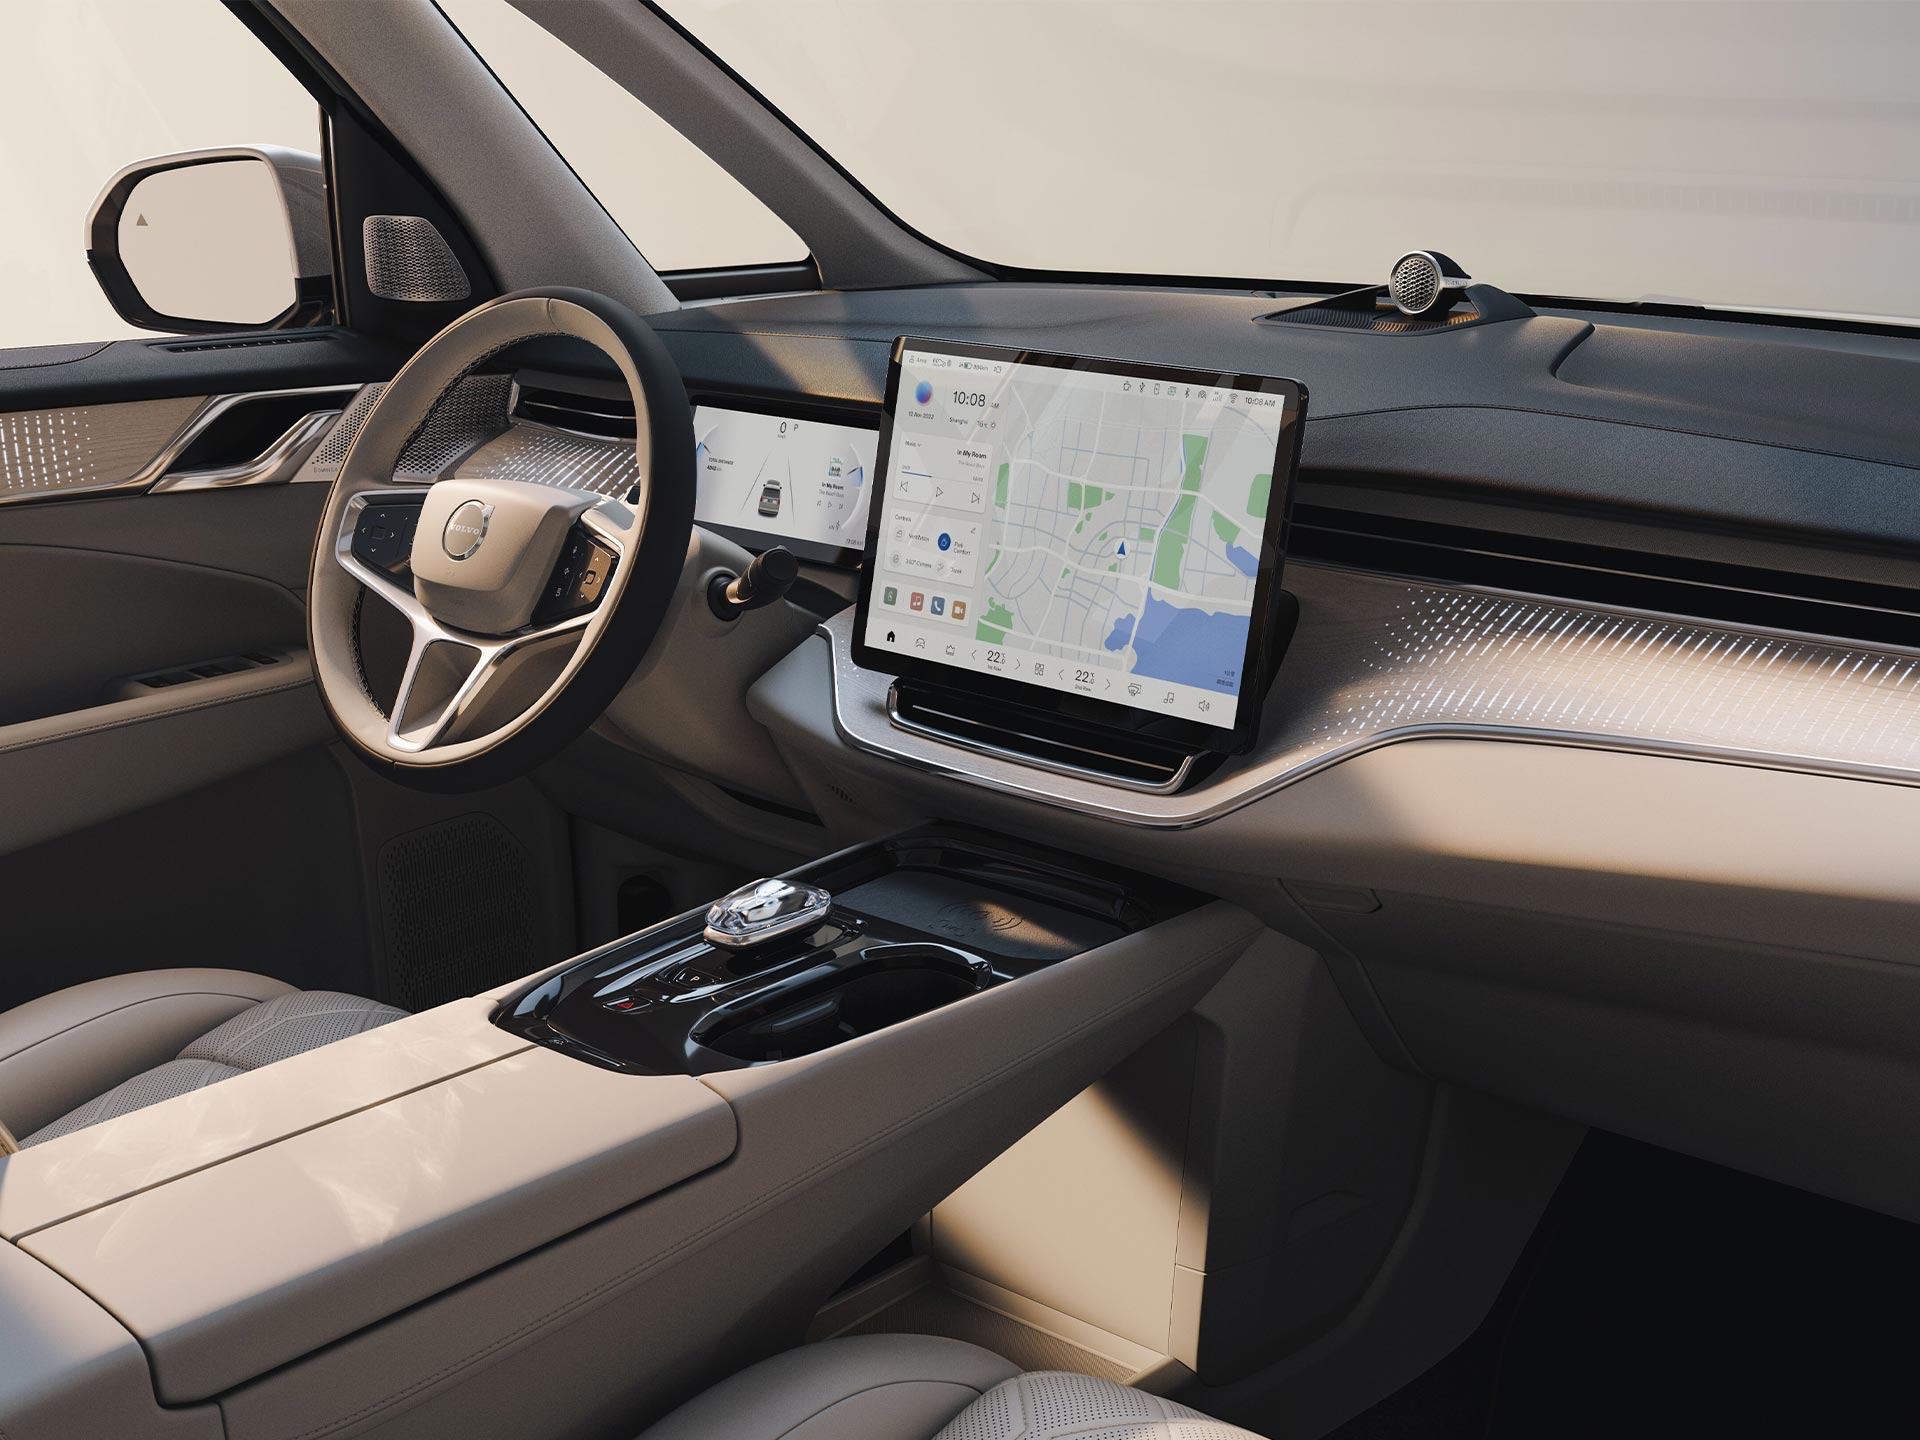 Image of the Orrefors crystal gear shift, wireless charger and storage featured in the fully electric EM90.